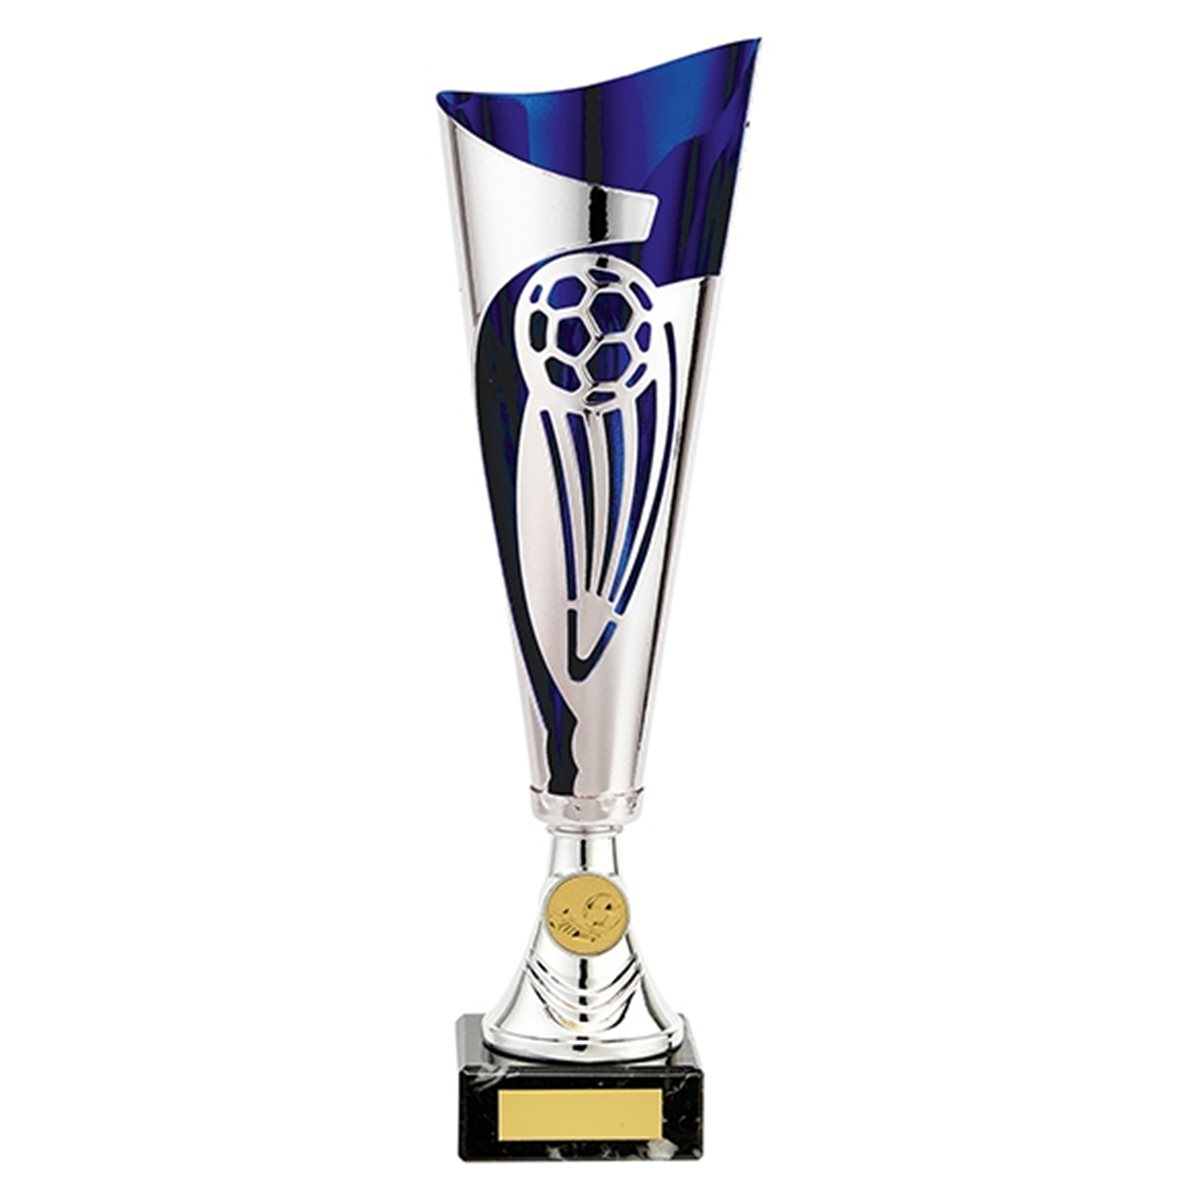 Silver and Blue Lasered Plastic Football Award on Black Base TR19706